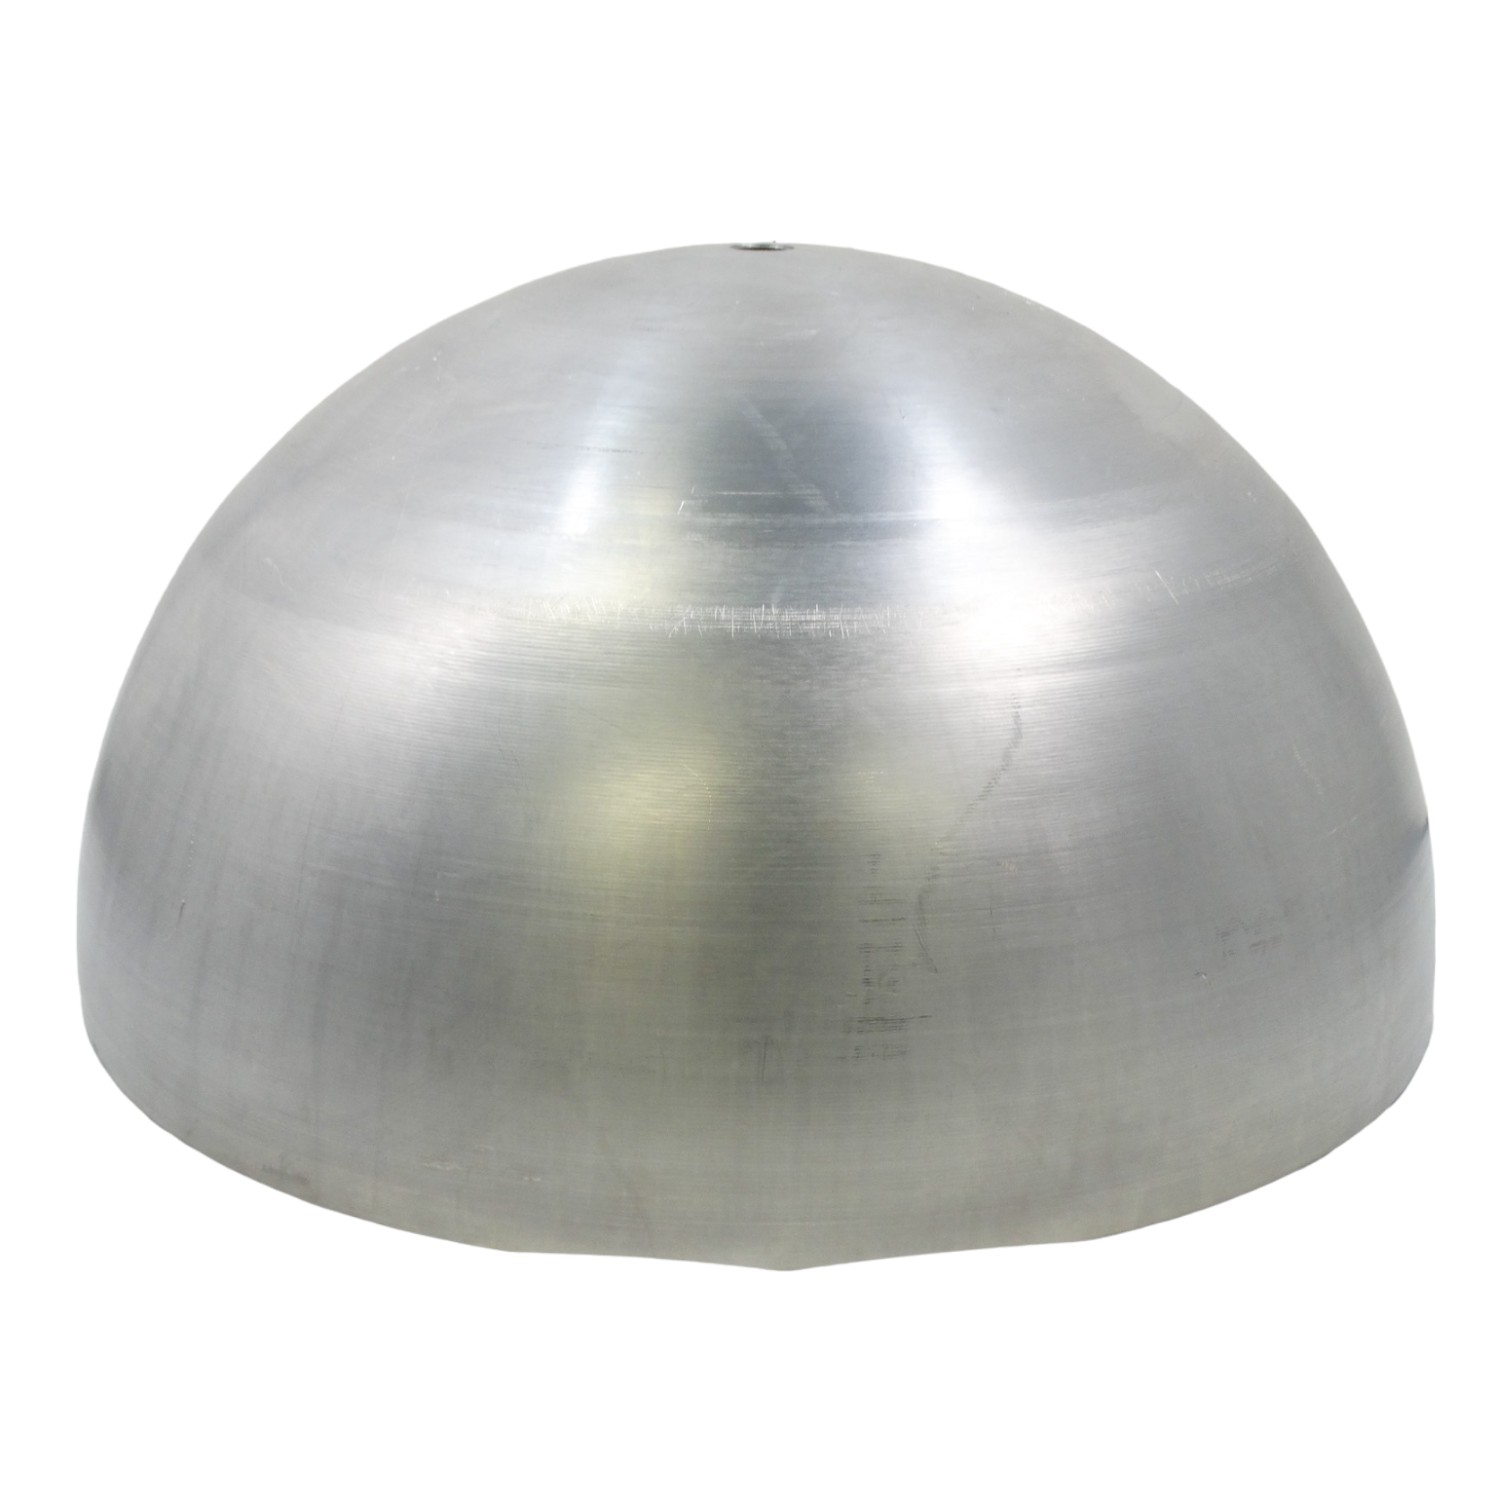 Three large contemporary aluminium light shades - dome shaped, by repute formerly fittings from